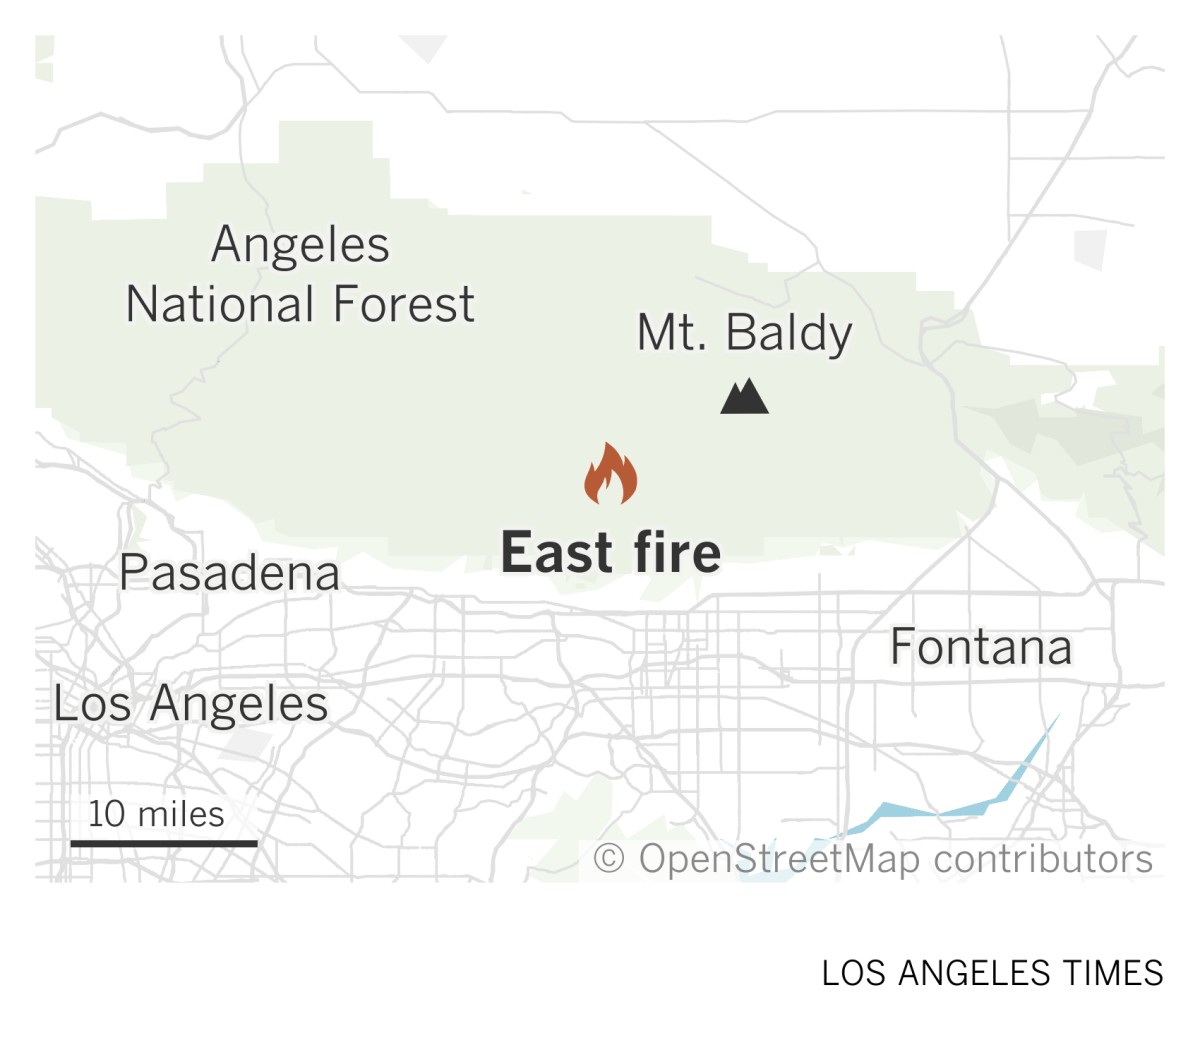 A map of the Angeles National Forest area shows the location of the East fire burning southwest of Mt. Baldy